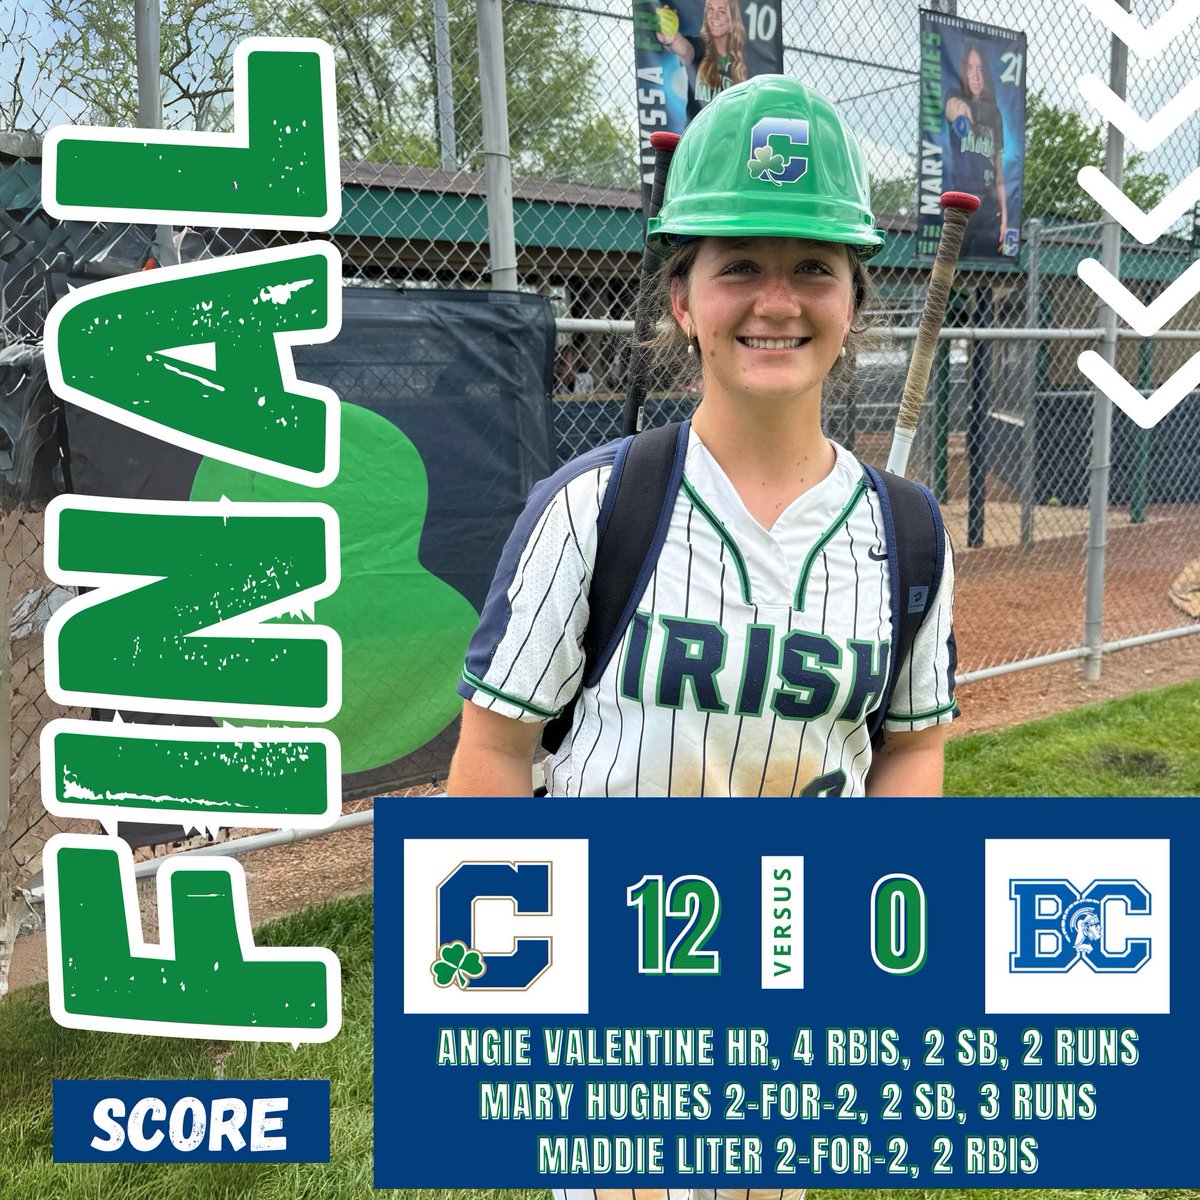 IRISH = CITY CHAMPS❤️ Irish score 4 in the 1st with aggressive base running by ⁦@mar_yhughes⁩ & timely hitting by ⁦@alyssafry_10⁩ ⁦@sidneyfeczko⁩ ⁦@_aubriewright_⁩ A 3-run homer by ⁦@_angela3_3⁩ sealed the deal. Great TEAM win!